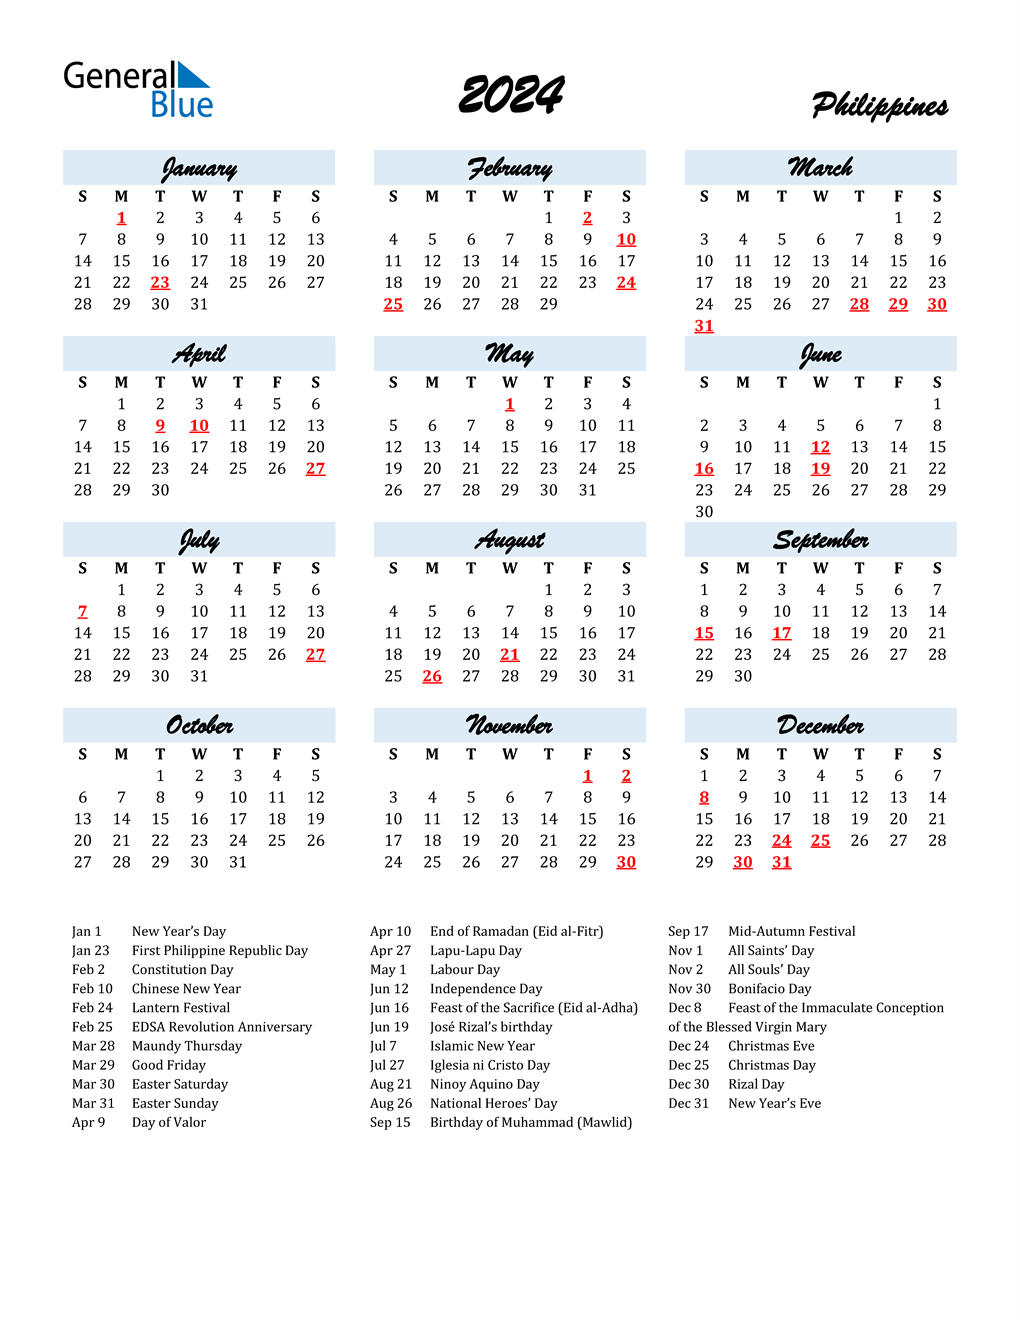 2024 Philippines Calendar With Holidays | Free Printable 2024 Calendar With Holidays Philippines